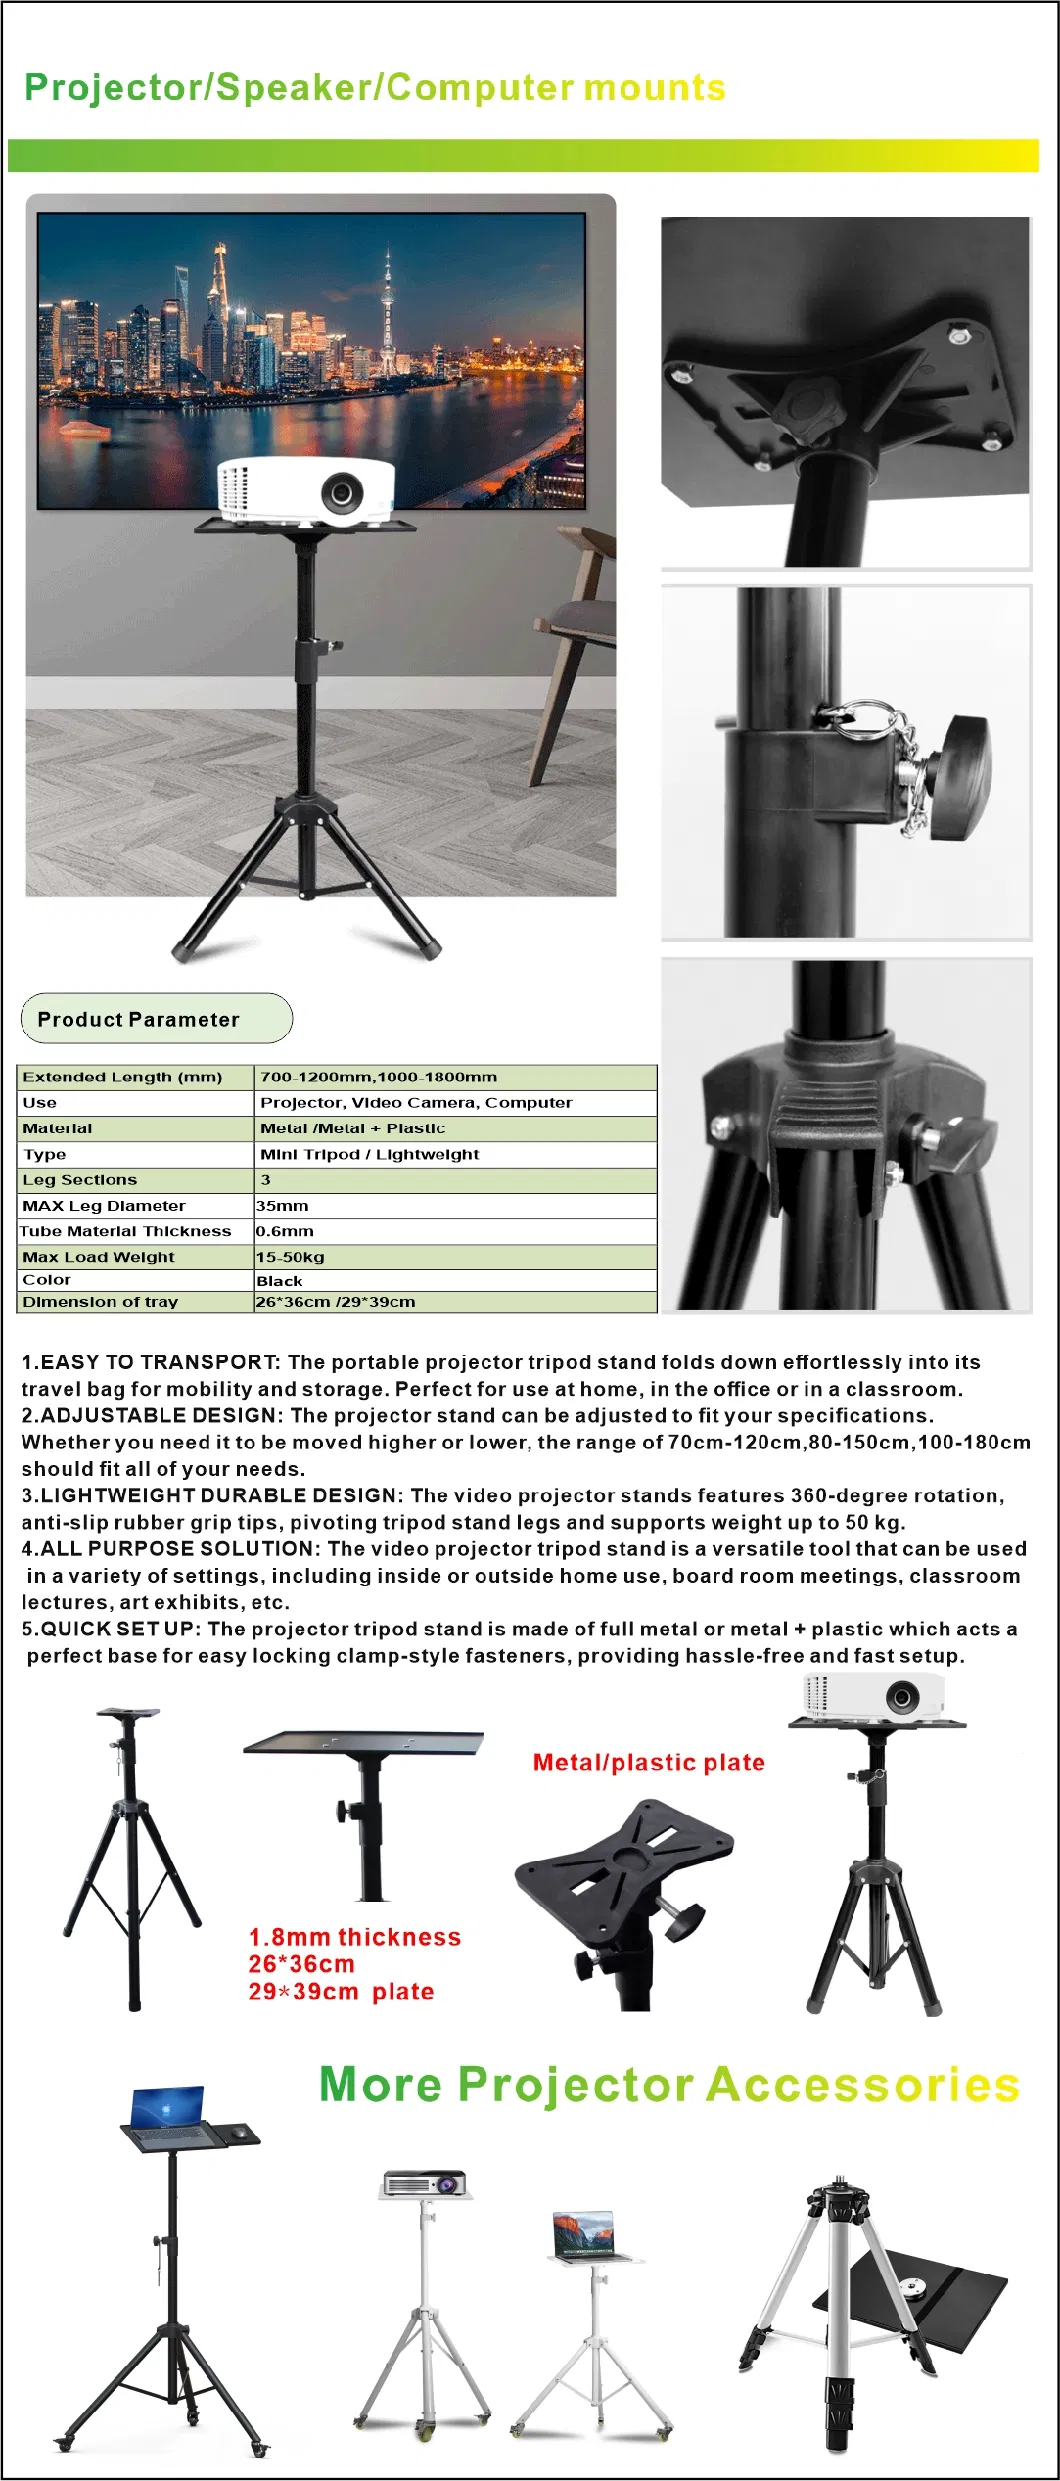 Foldable 6 Feet Projector Table Steel Tripod Stand in Adjustable Height